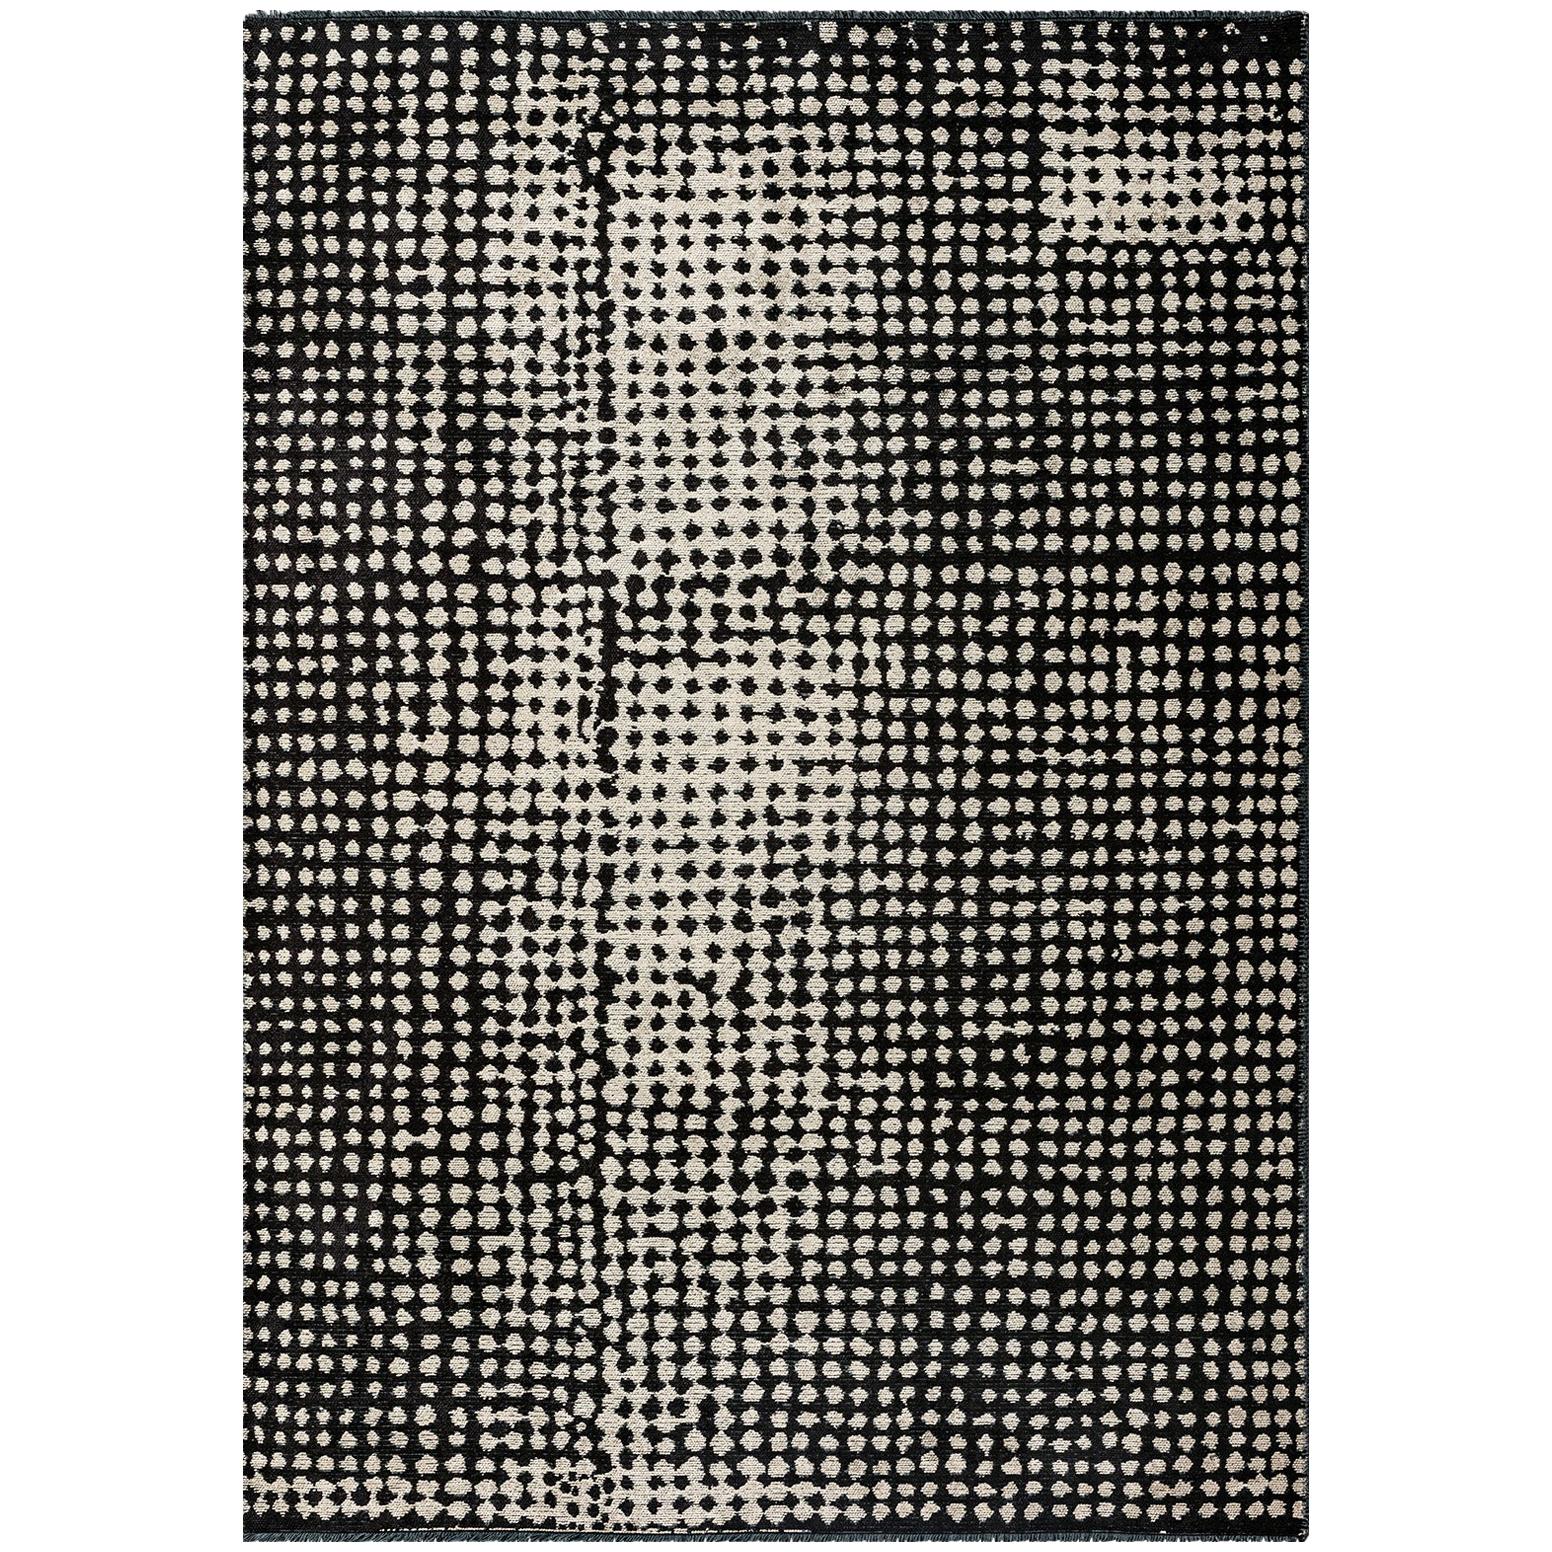 The Moderns Moroccan Berber Style Black and Cream Abstract Rug Fringe Optional (tapis abstrait noir et crème)